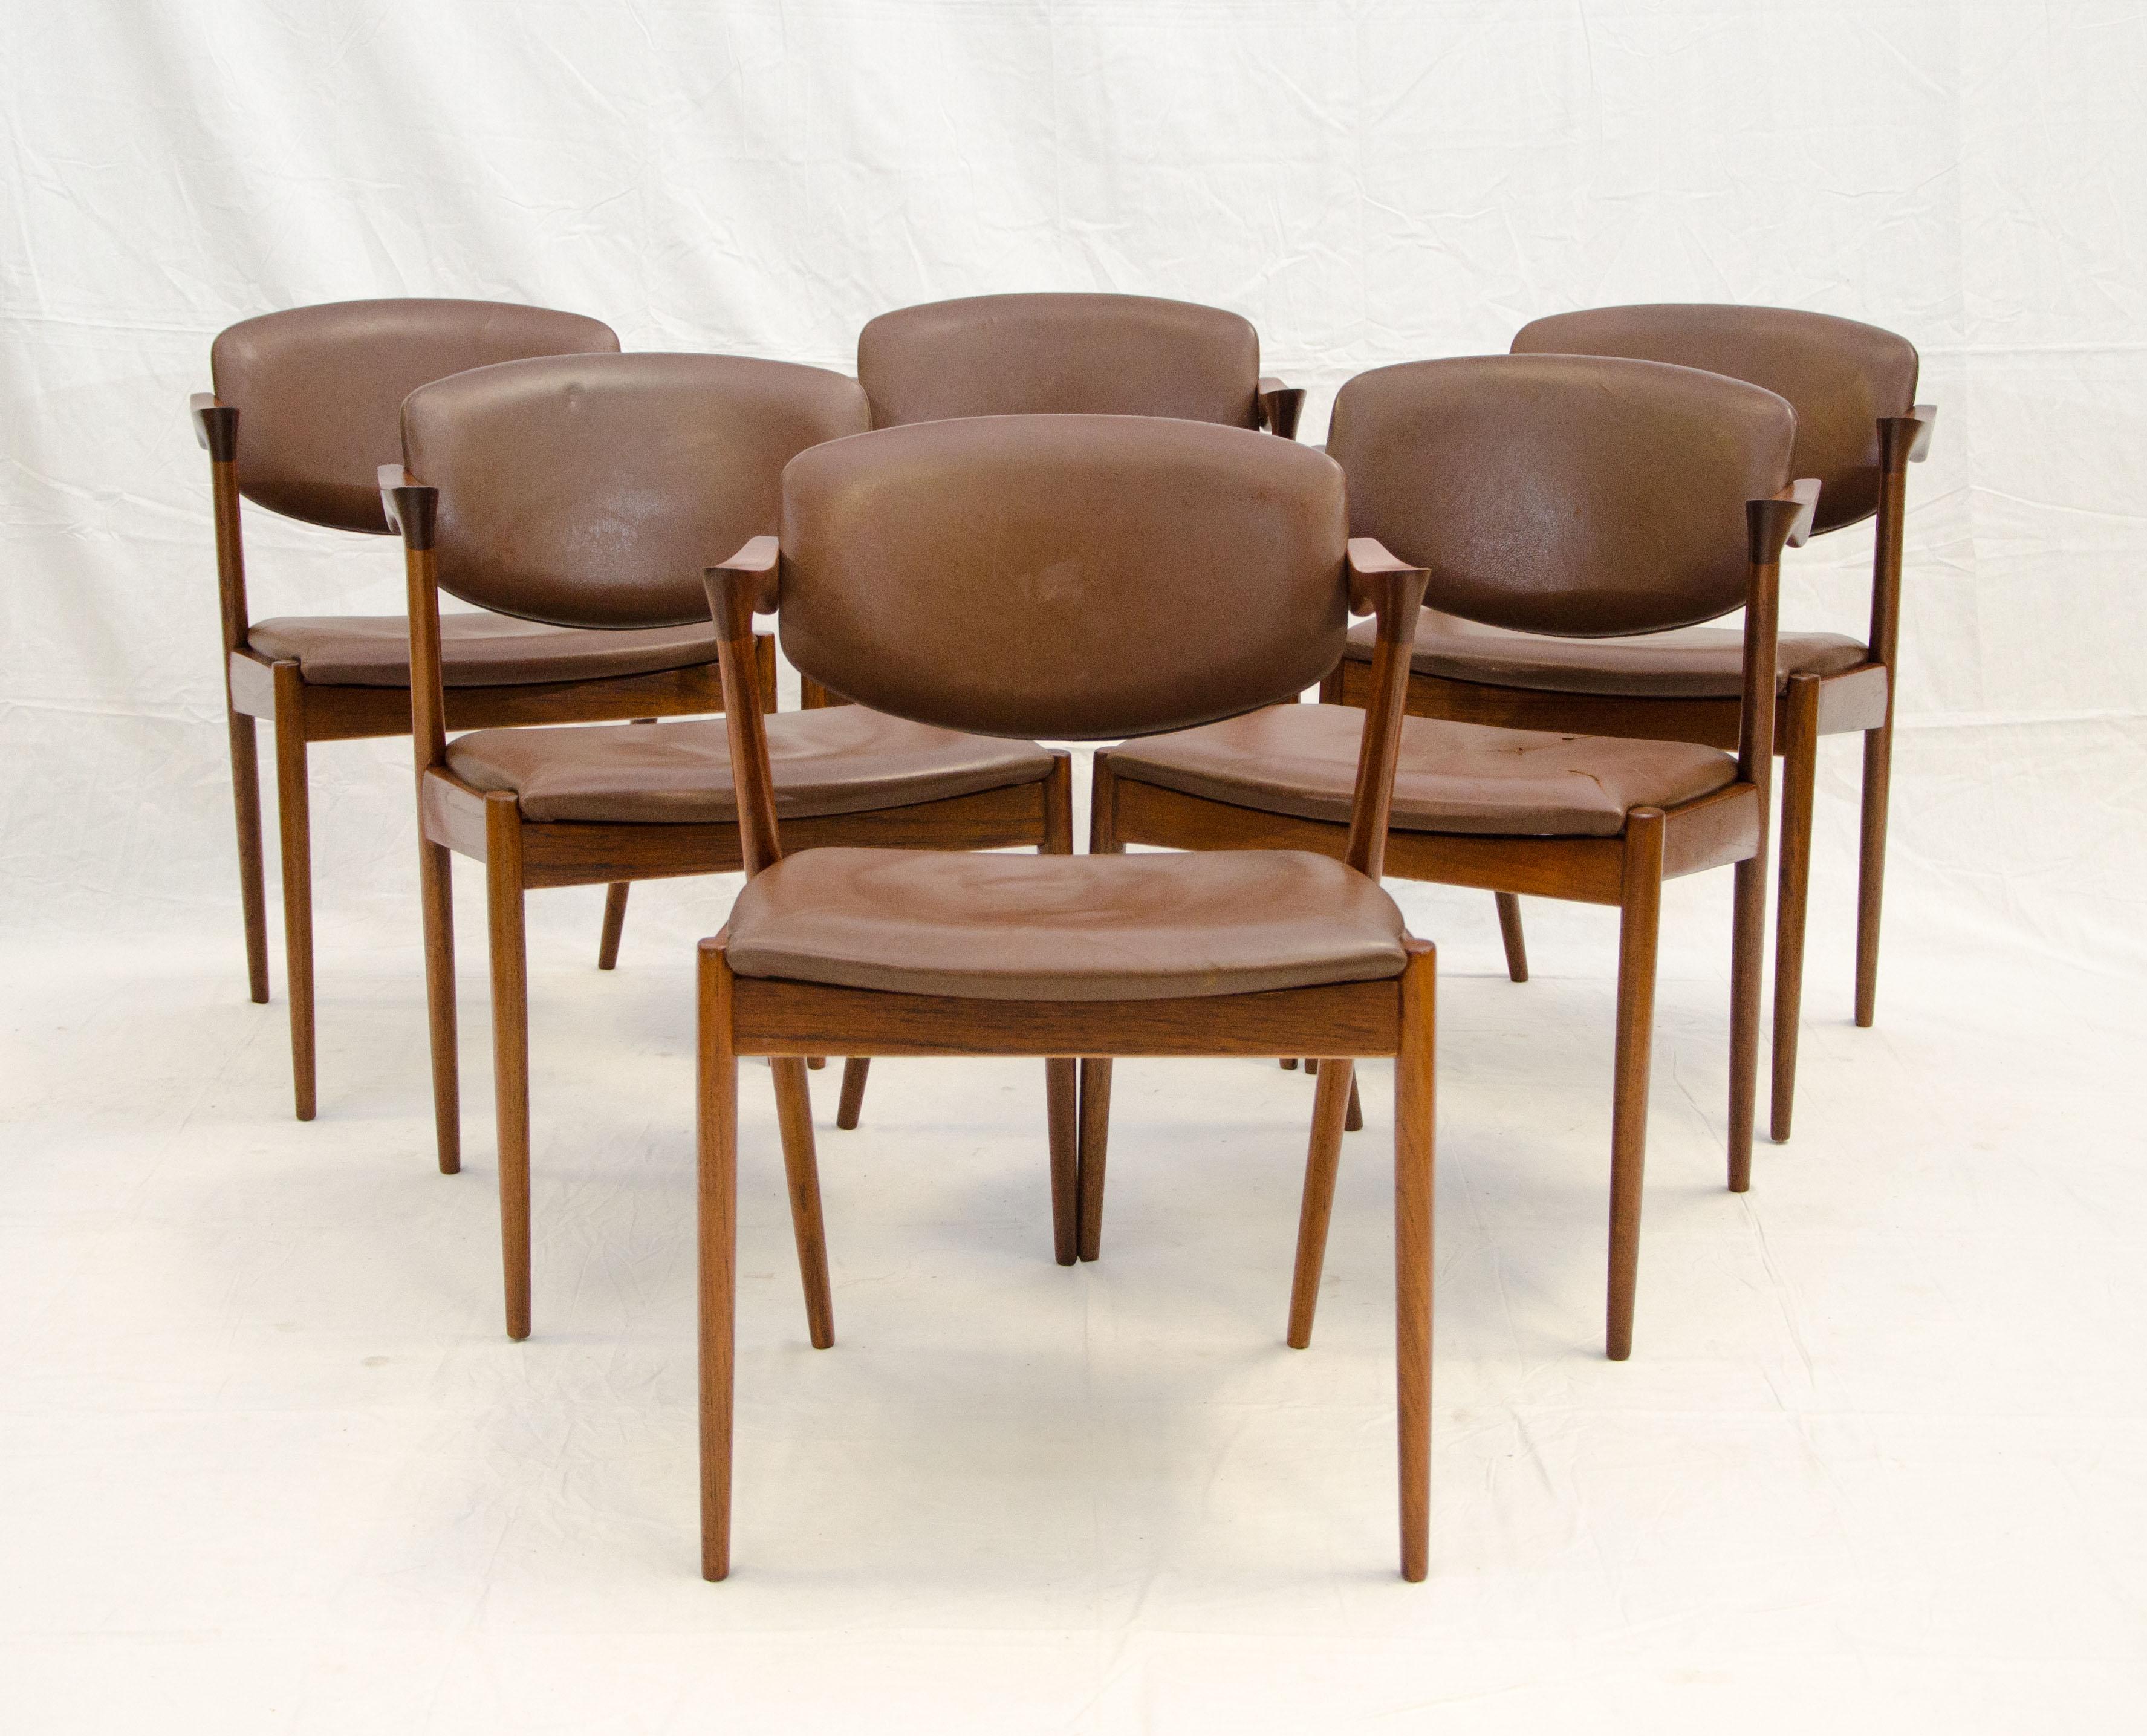 This set of six Danish teak dining chairs are also commonly described as Kai Kristiansen 